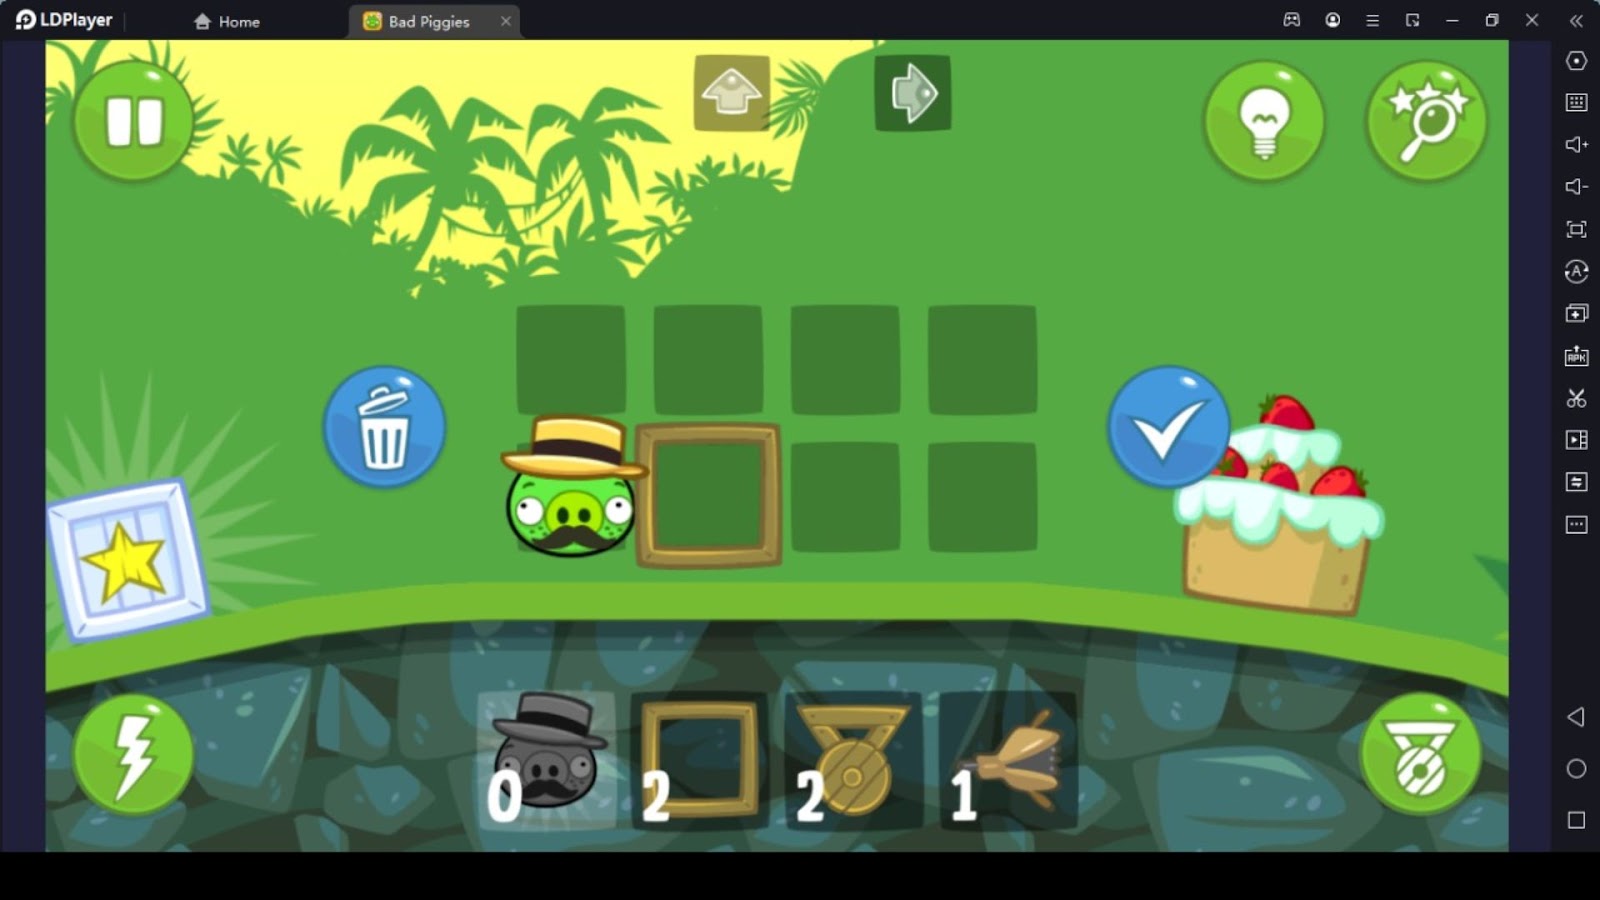 Leaving Out Some Parts Is Ok in Bad Piggies